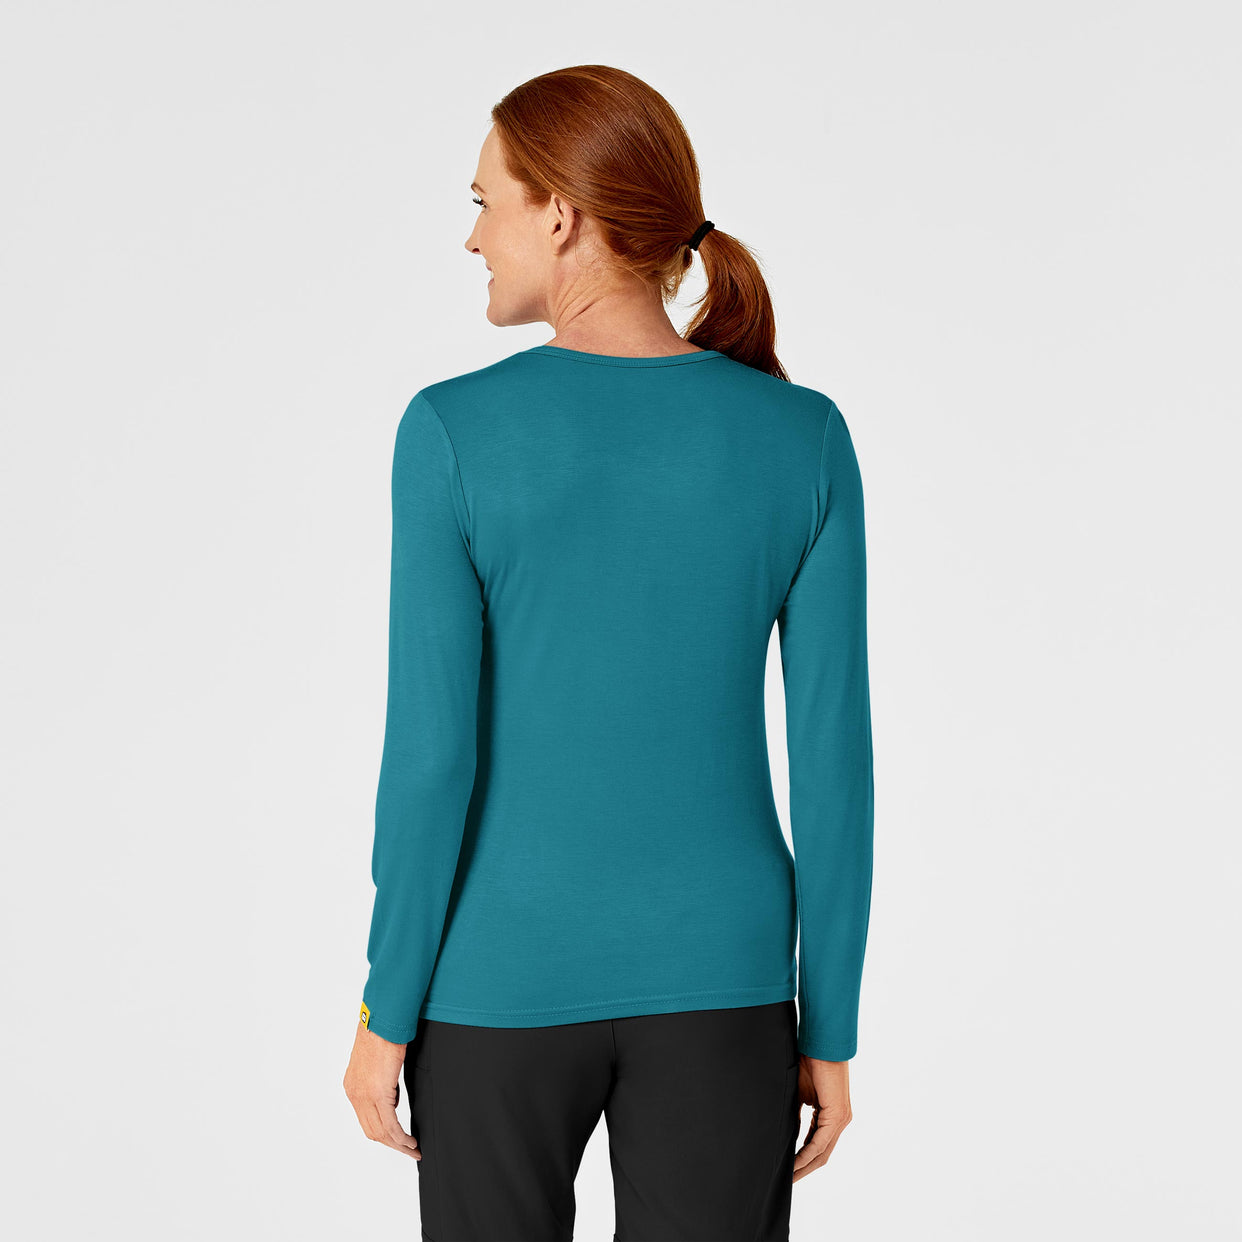 Knits and Layers Women's Long Sleeve Silky Tee Bay Blue back view